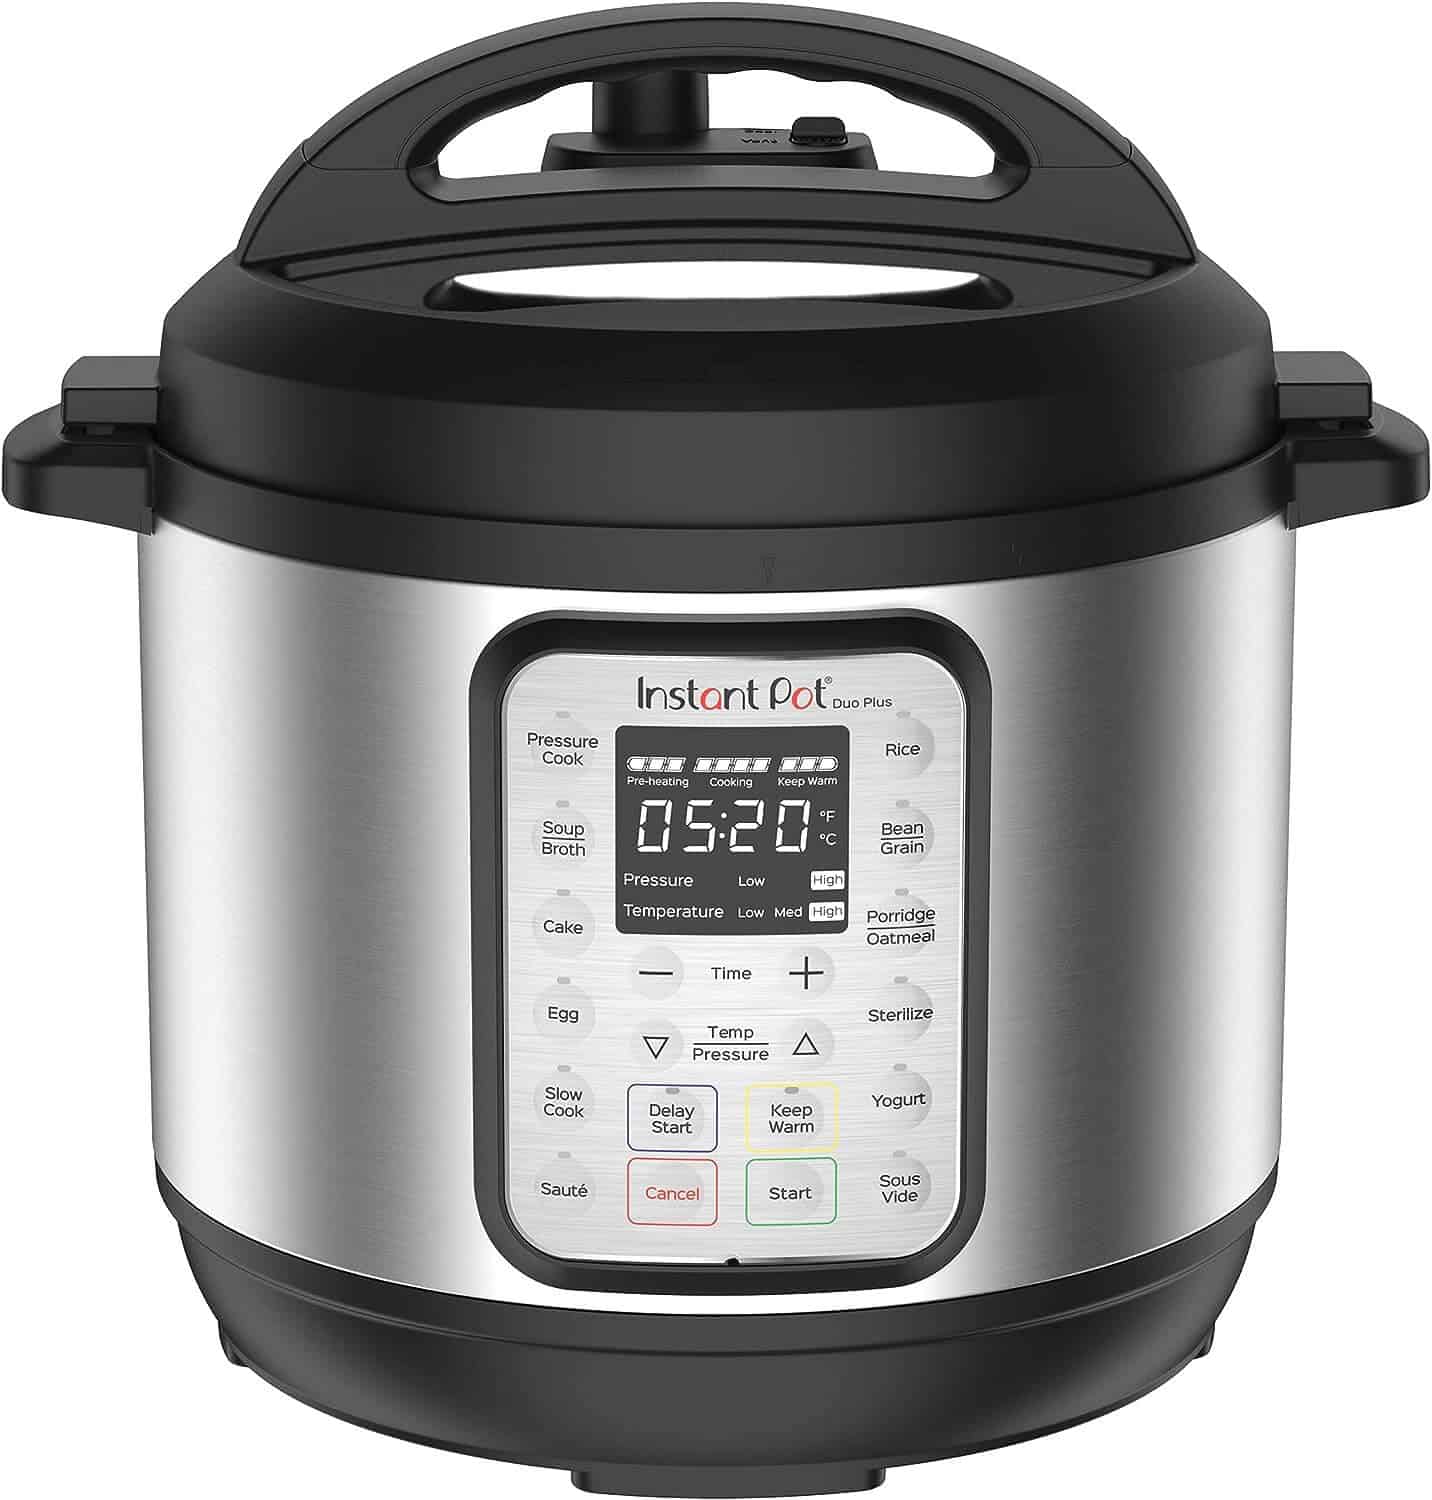 Instant Pot: christmas gift for new daddy